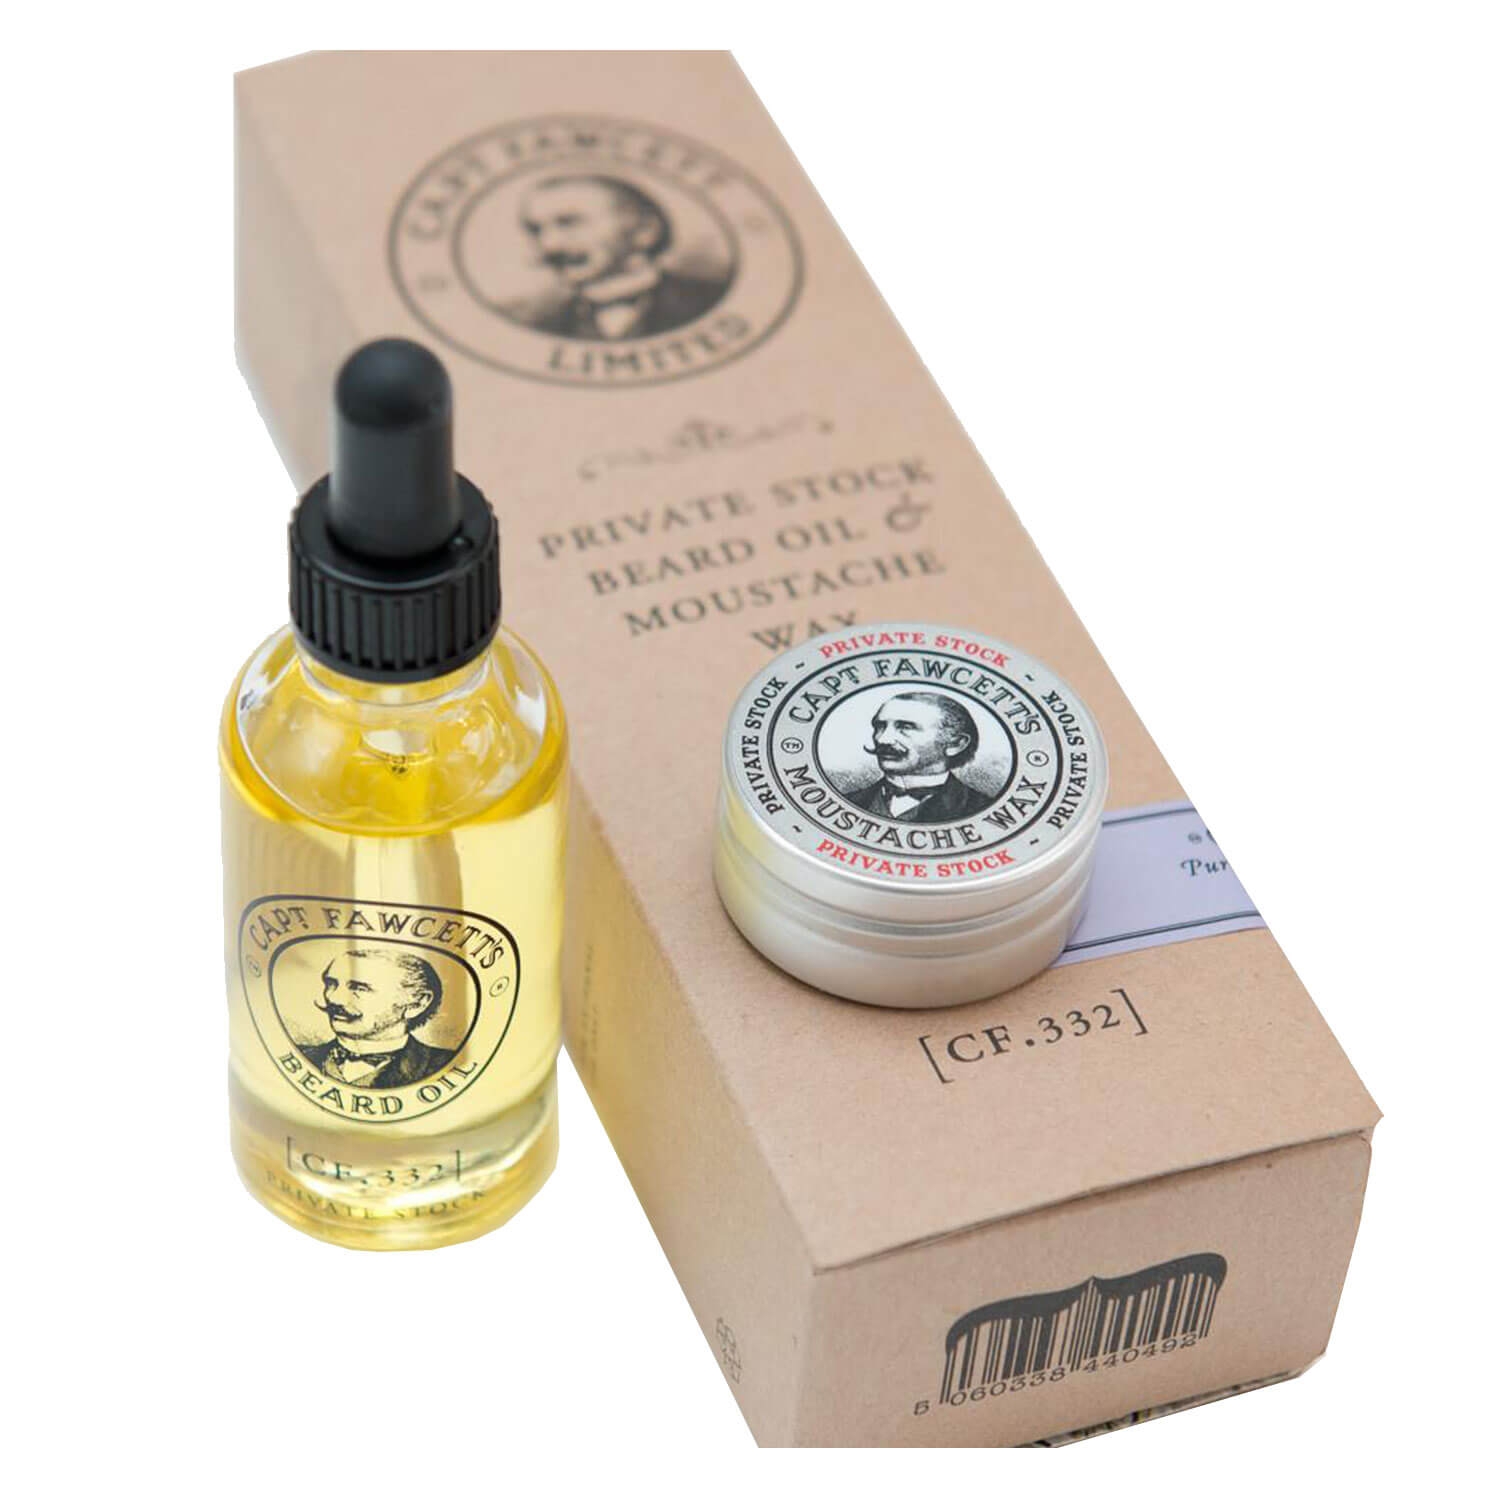 Product image from Capt. Fawcett Care - Private Stock Beard Oil & Moustache Wax Set